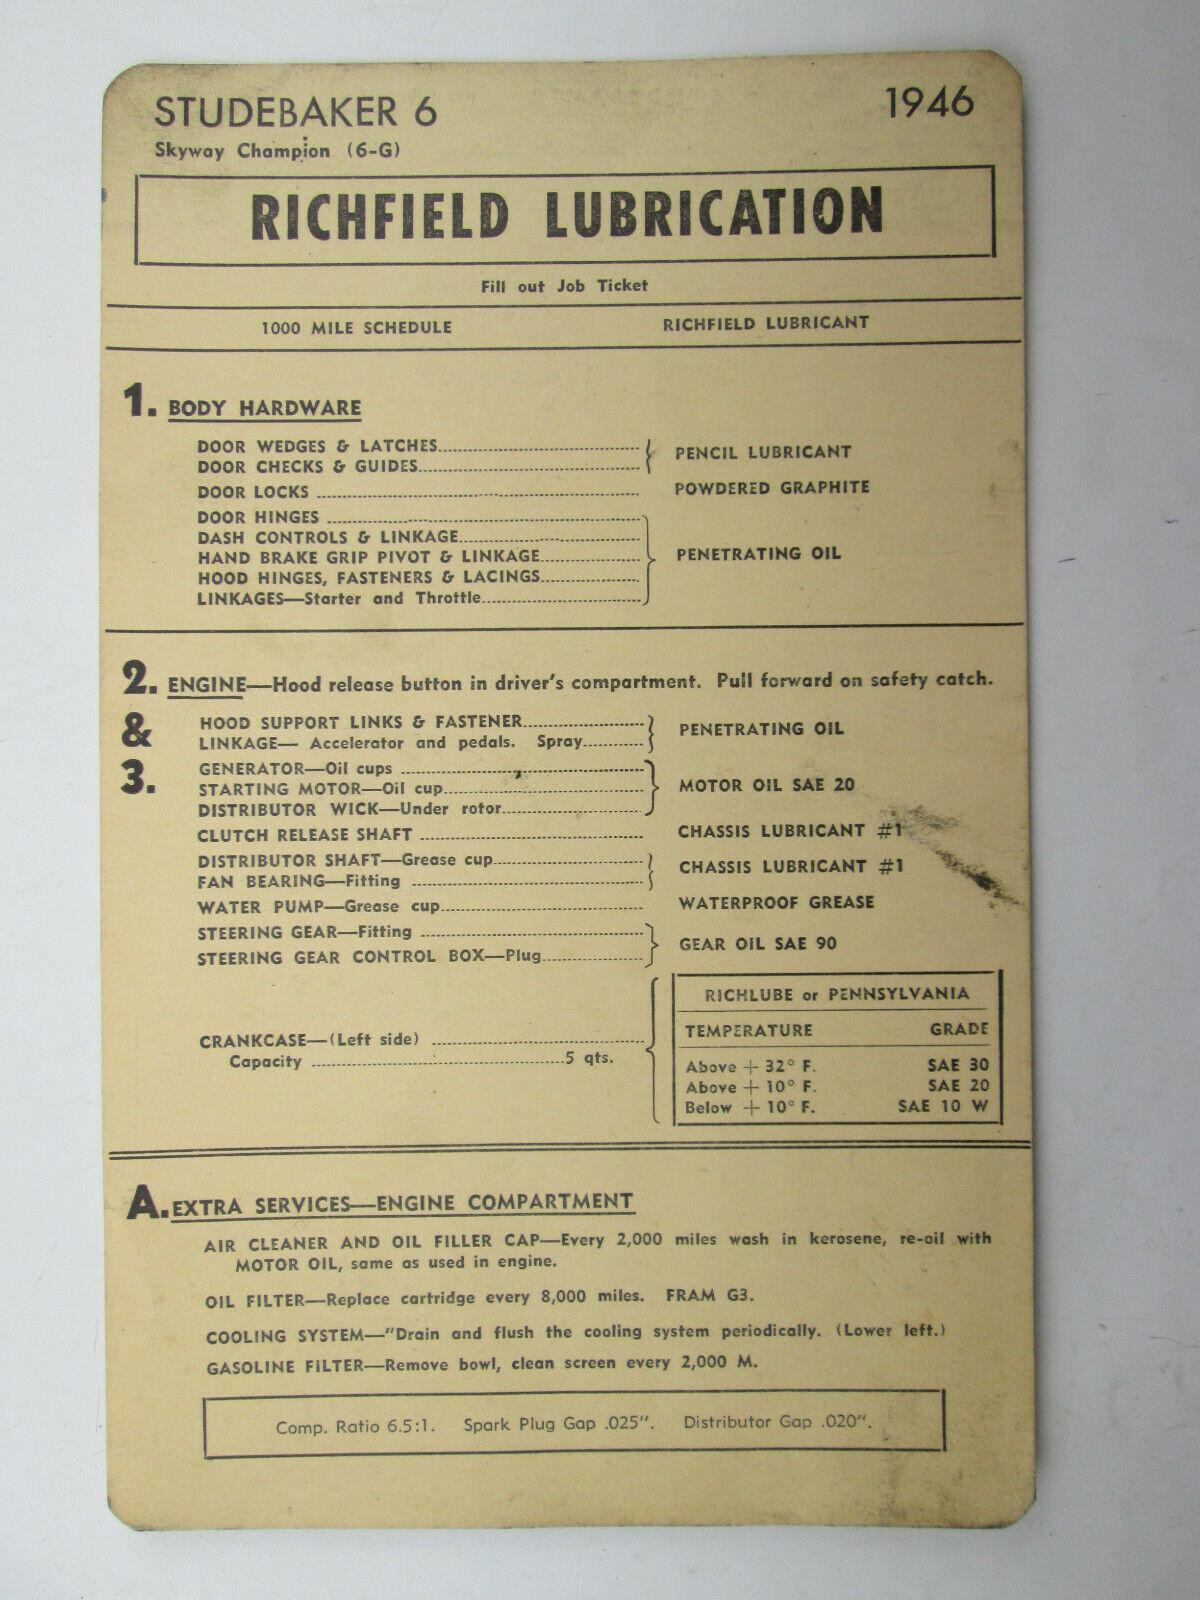 Richfield Lubrication Reference Card for Studebaker 6 Skyway Champion 1946